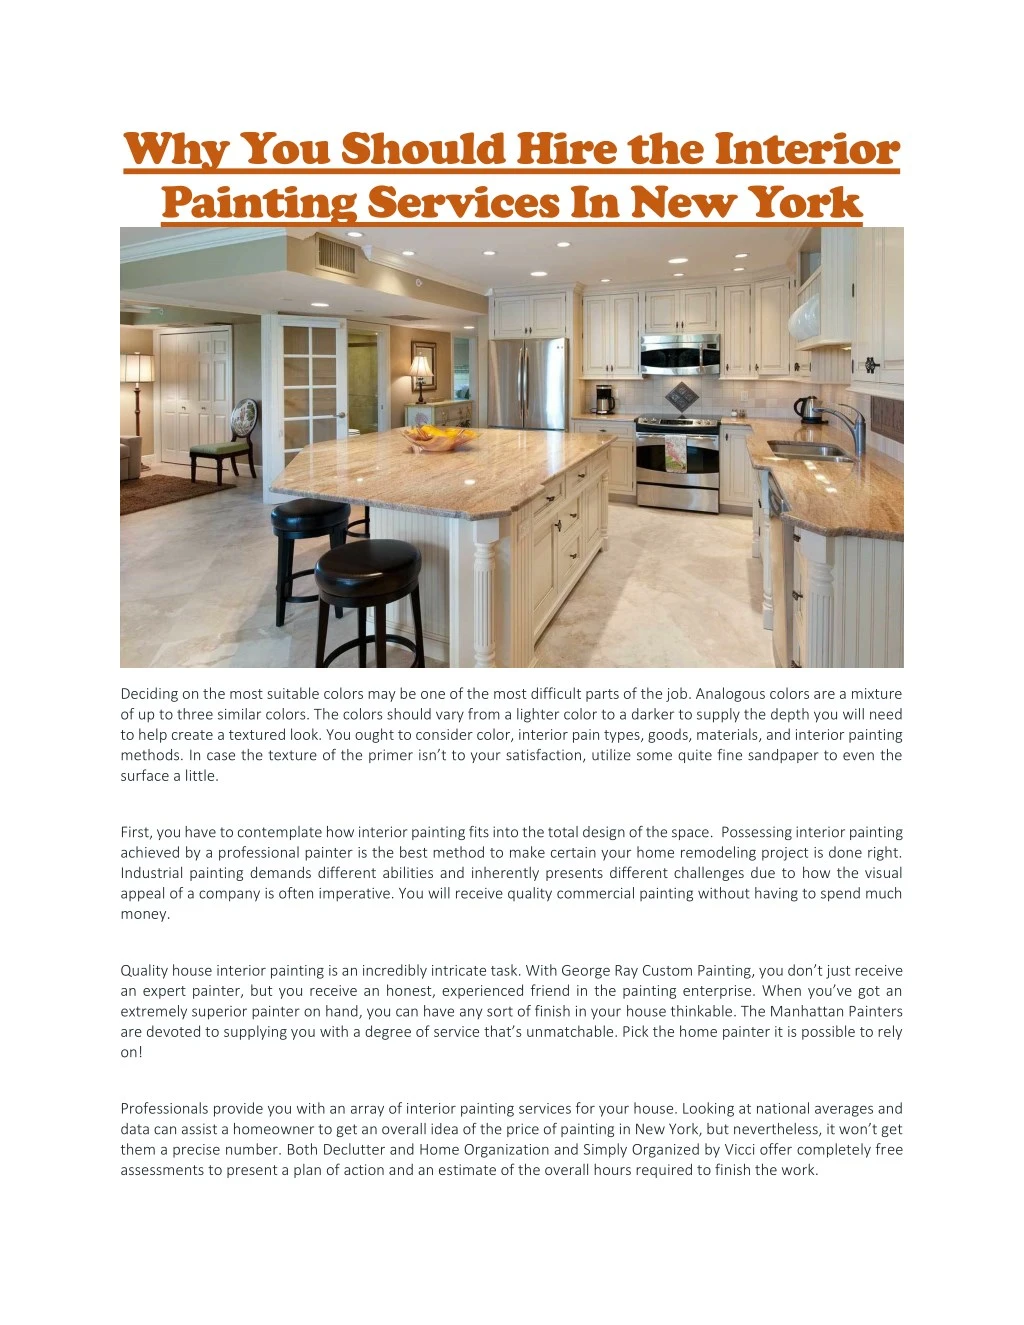 why you should hire the interior painting